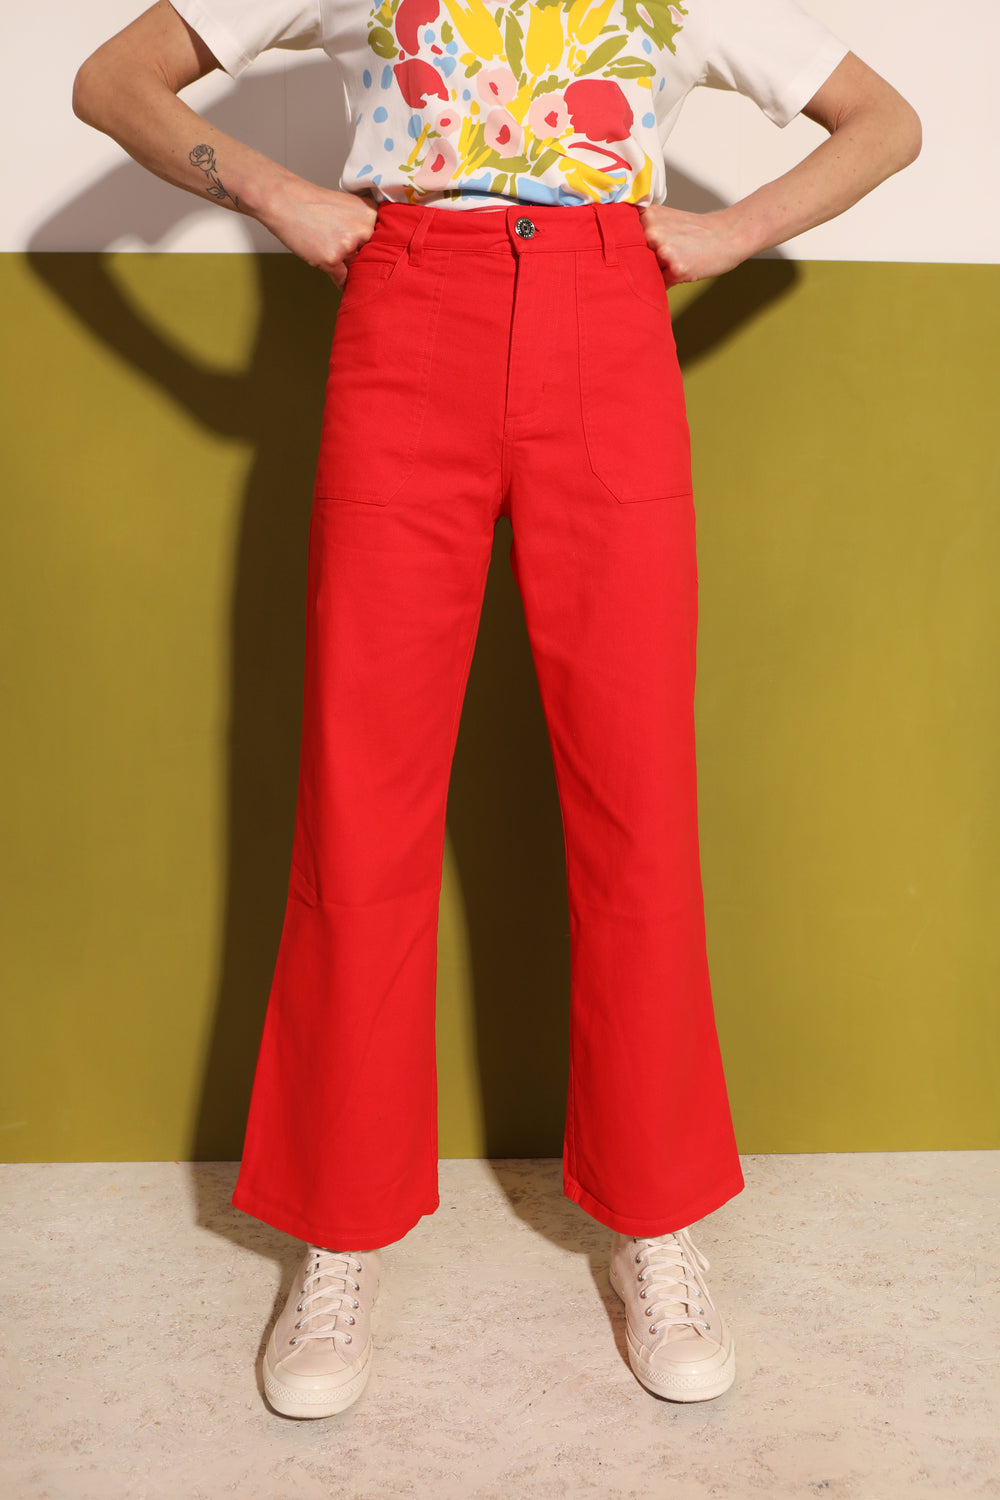 Didion Trouser Red